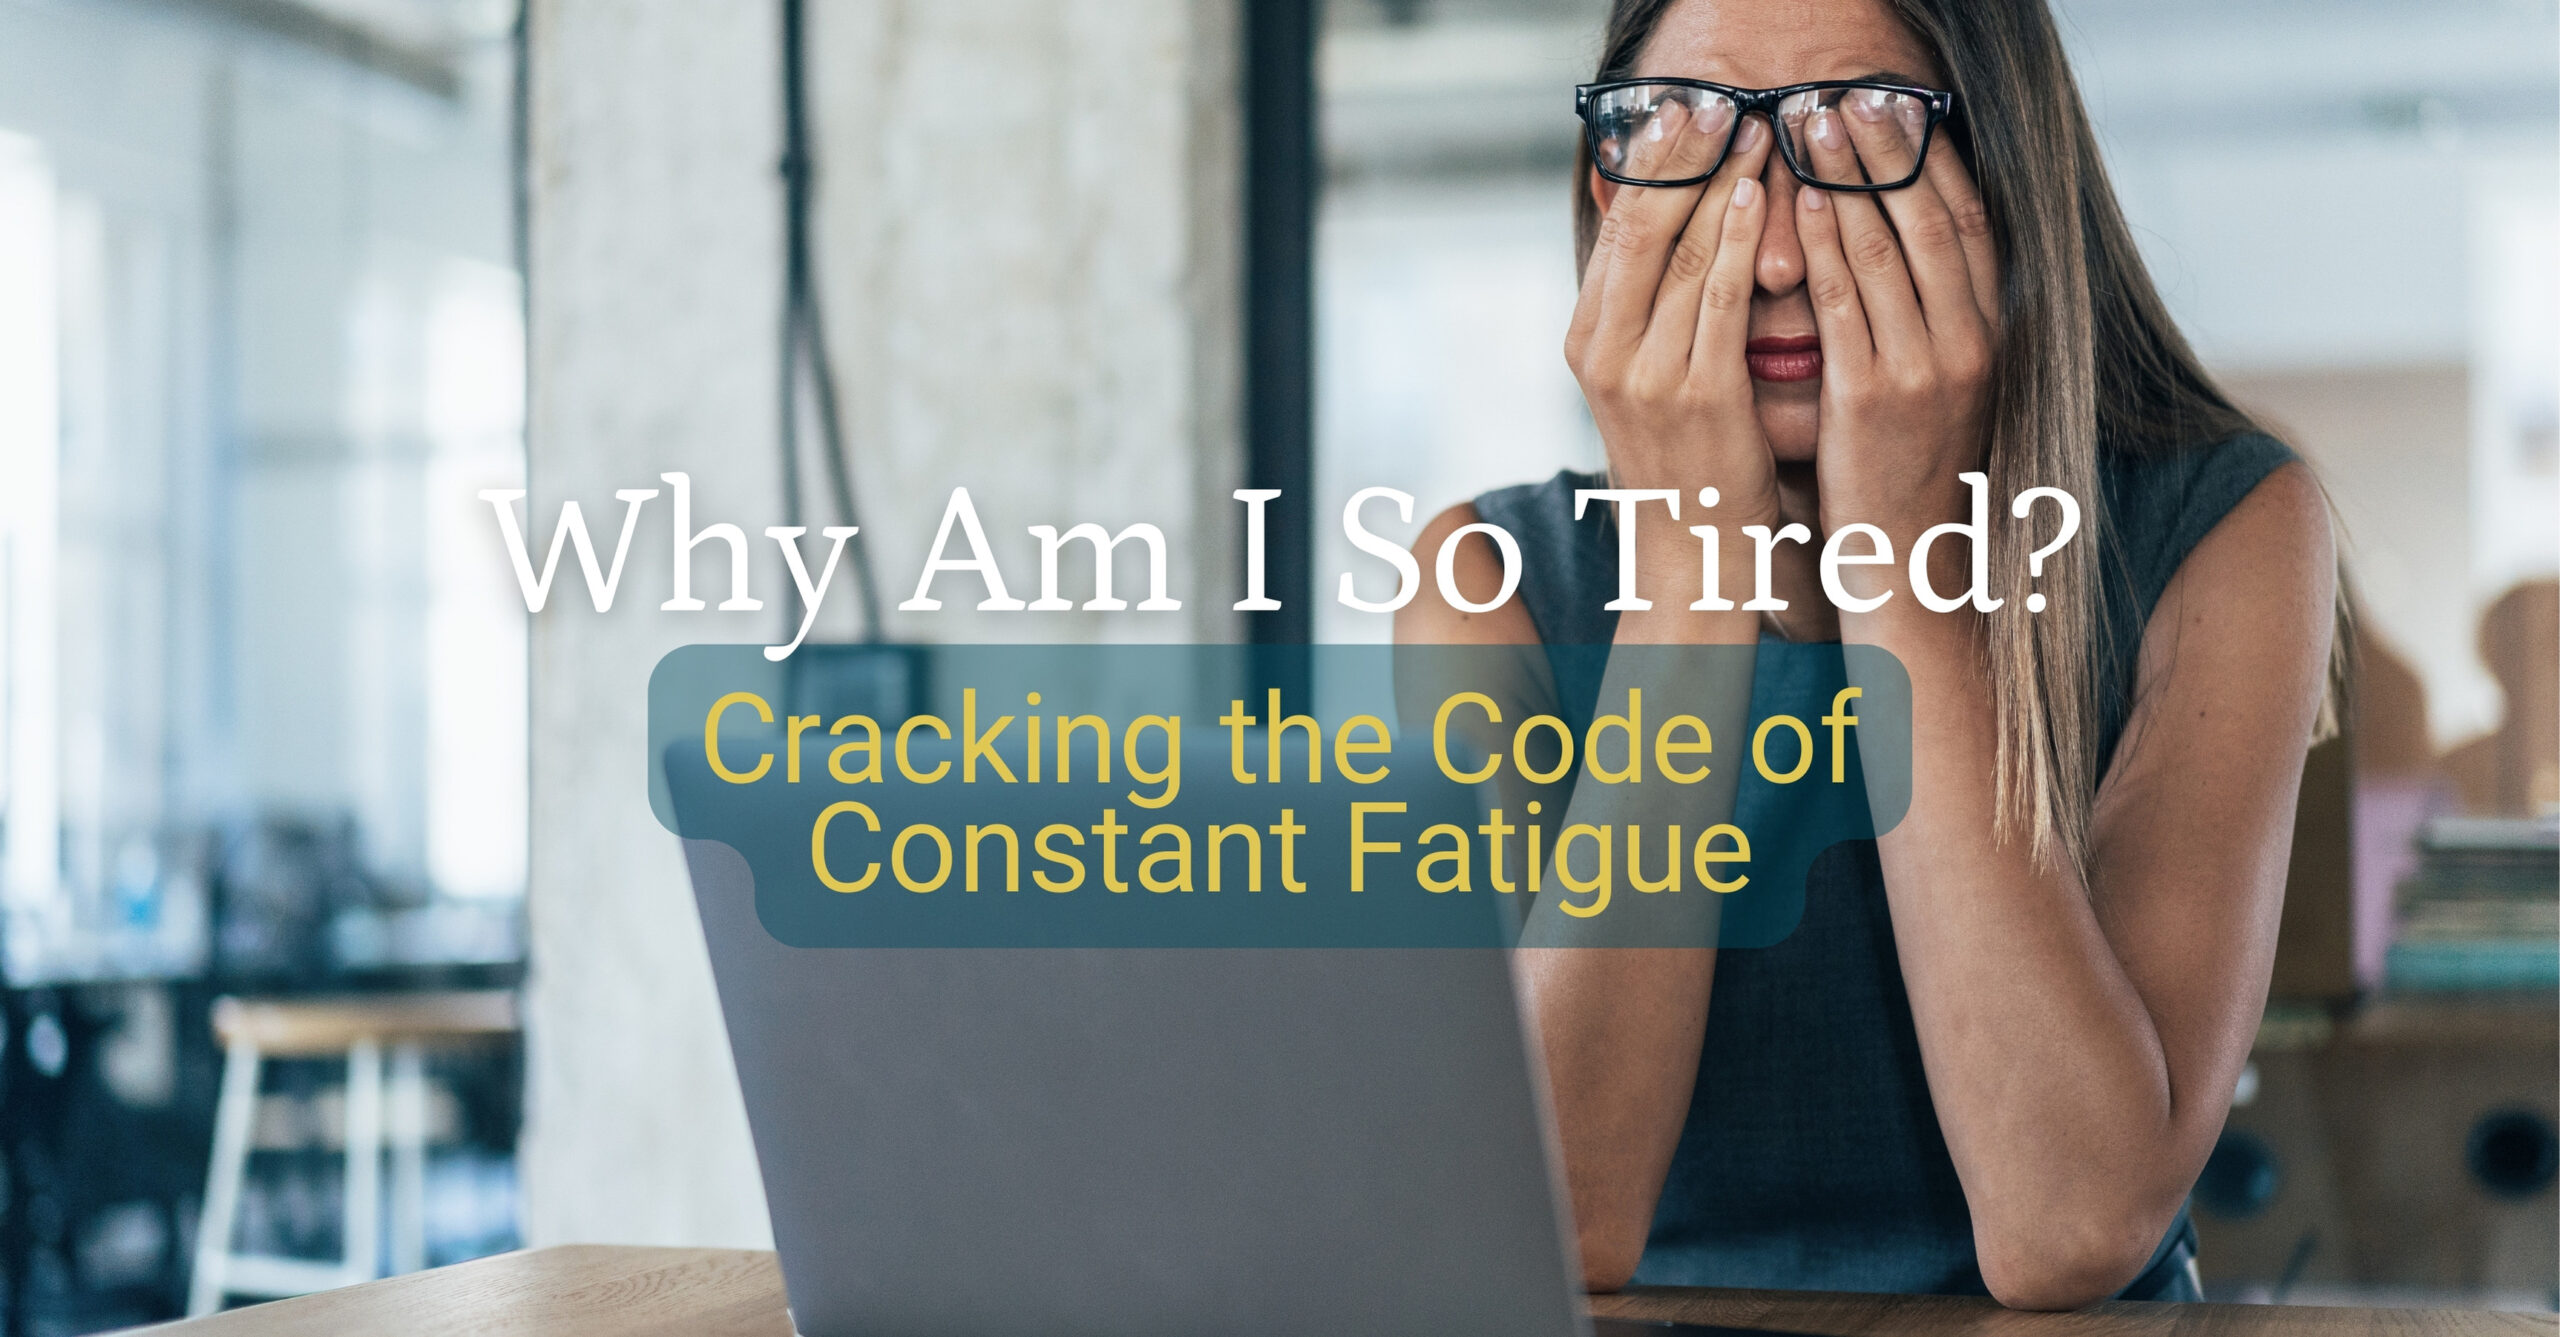 Why Am I So Tired? Cracking the Code of Constant Fatigue 3